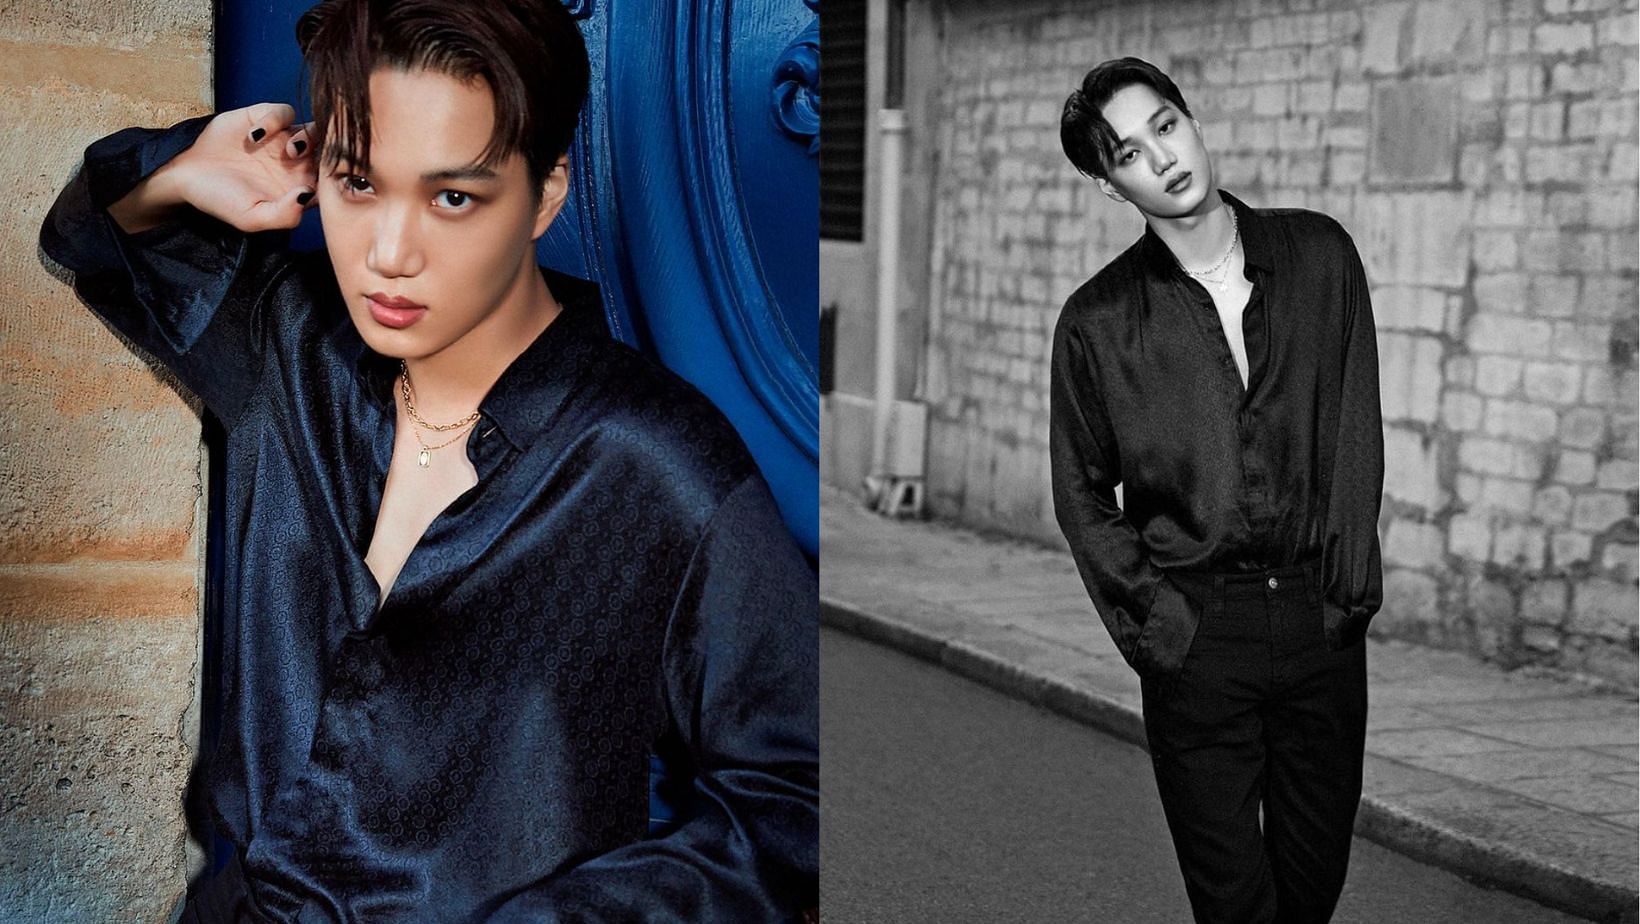 EXO's Kai to leave for military enlistment on May 11, shattered fans say,  'Can't handle this